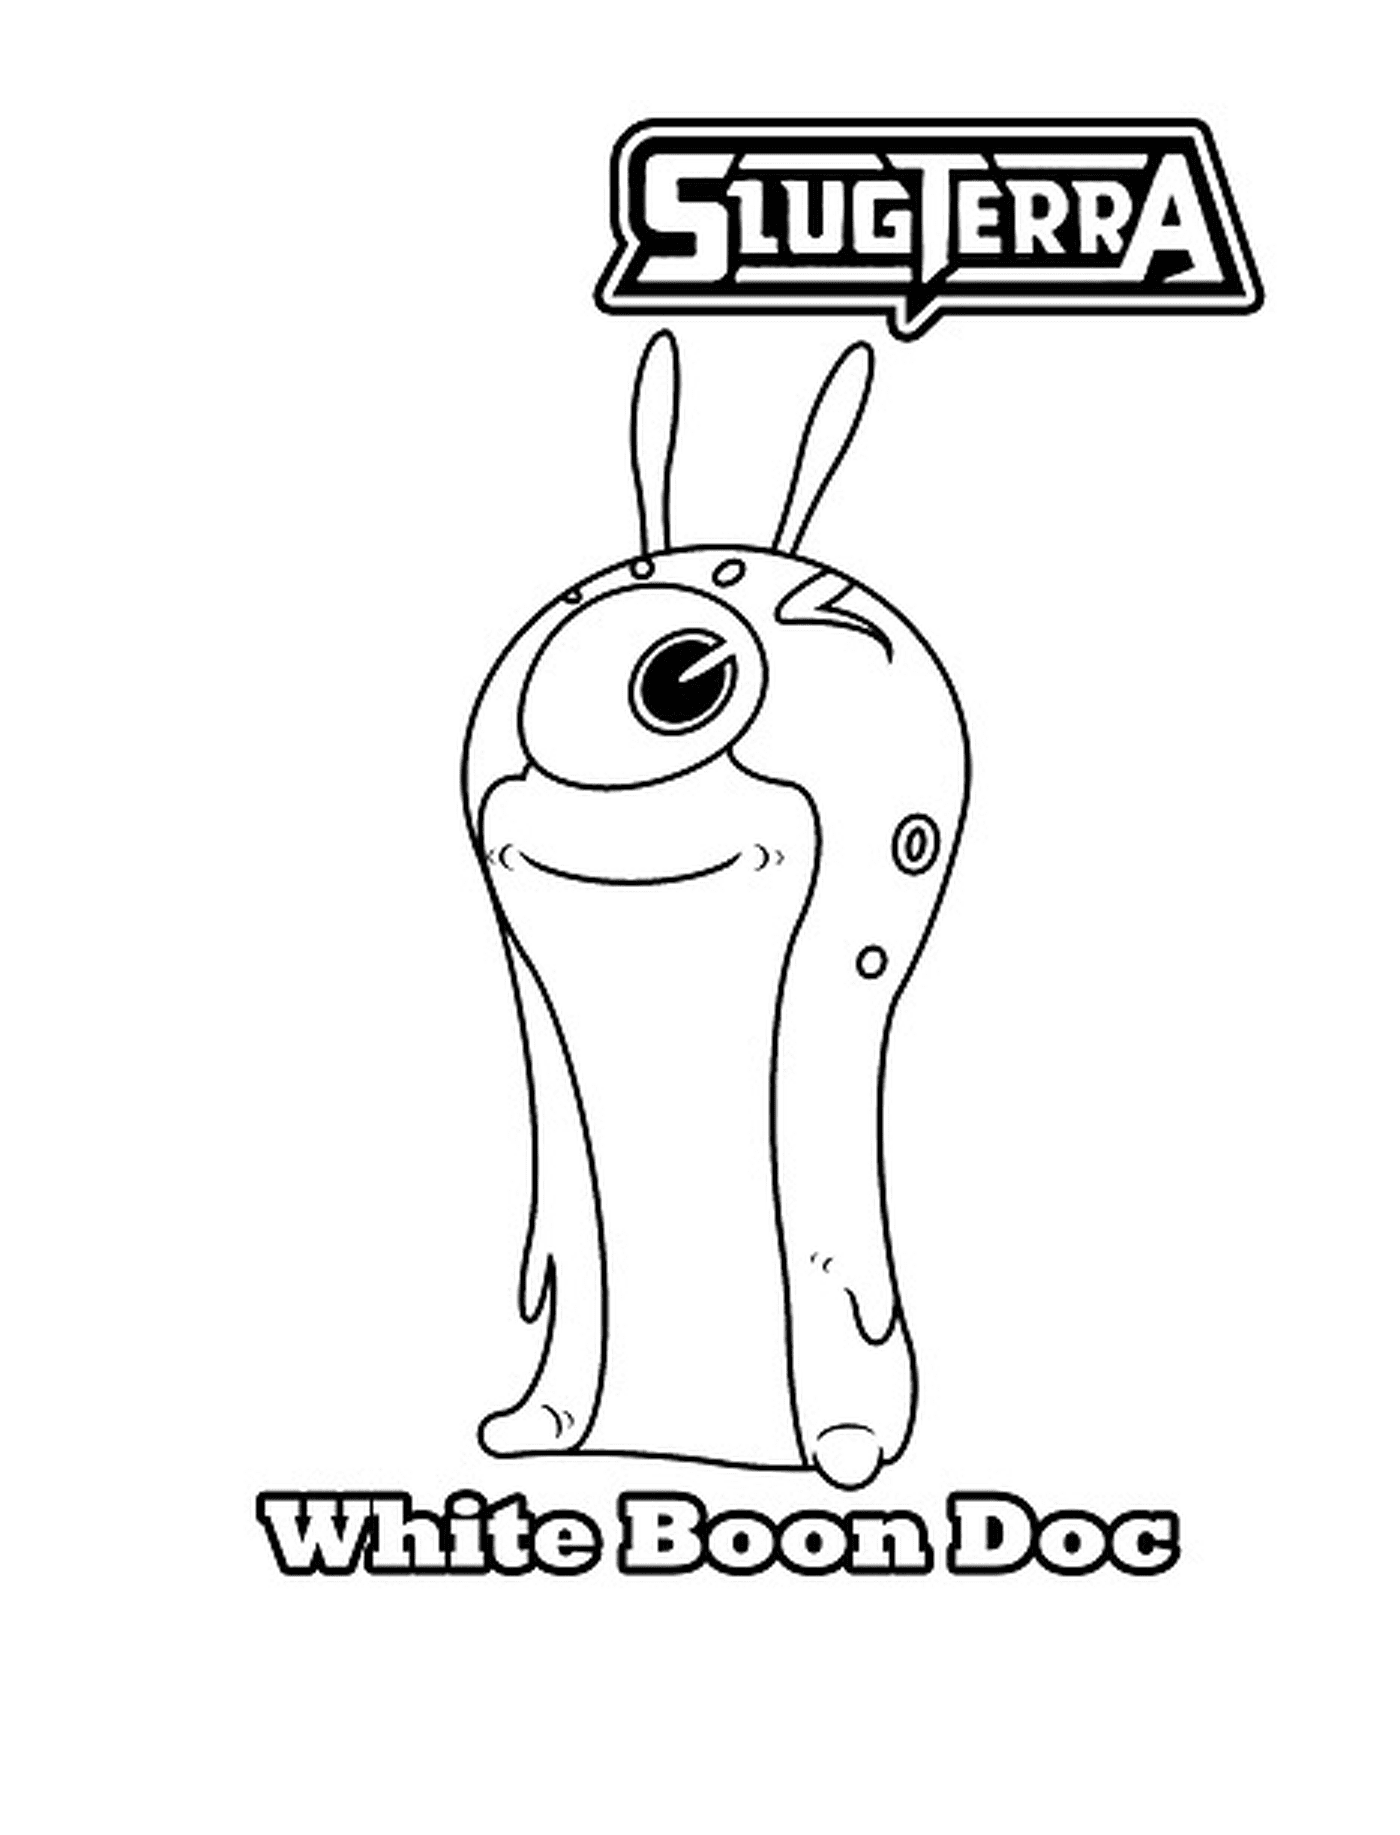  White Boon Doc, a white insect 